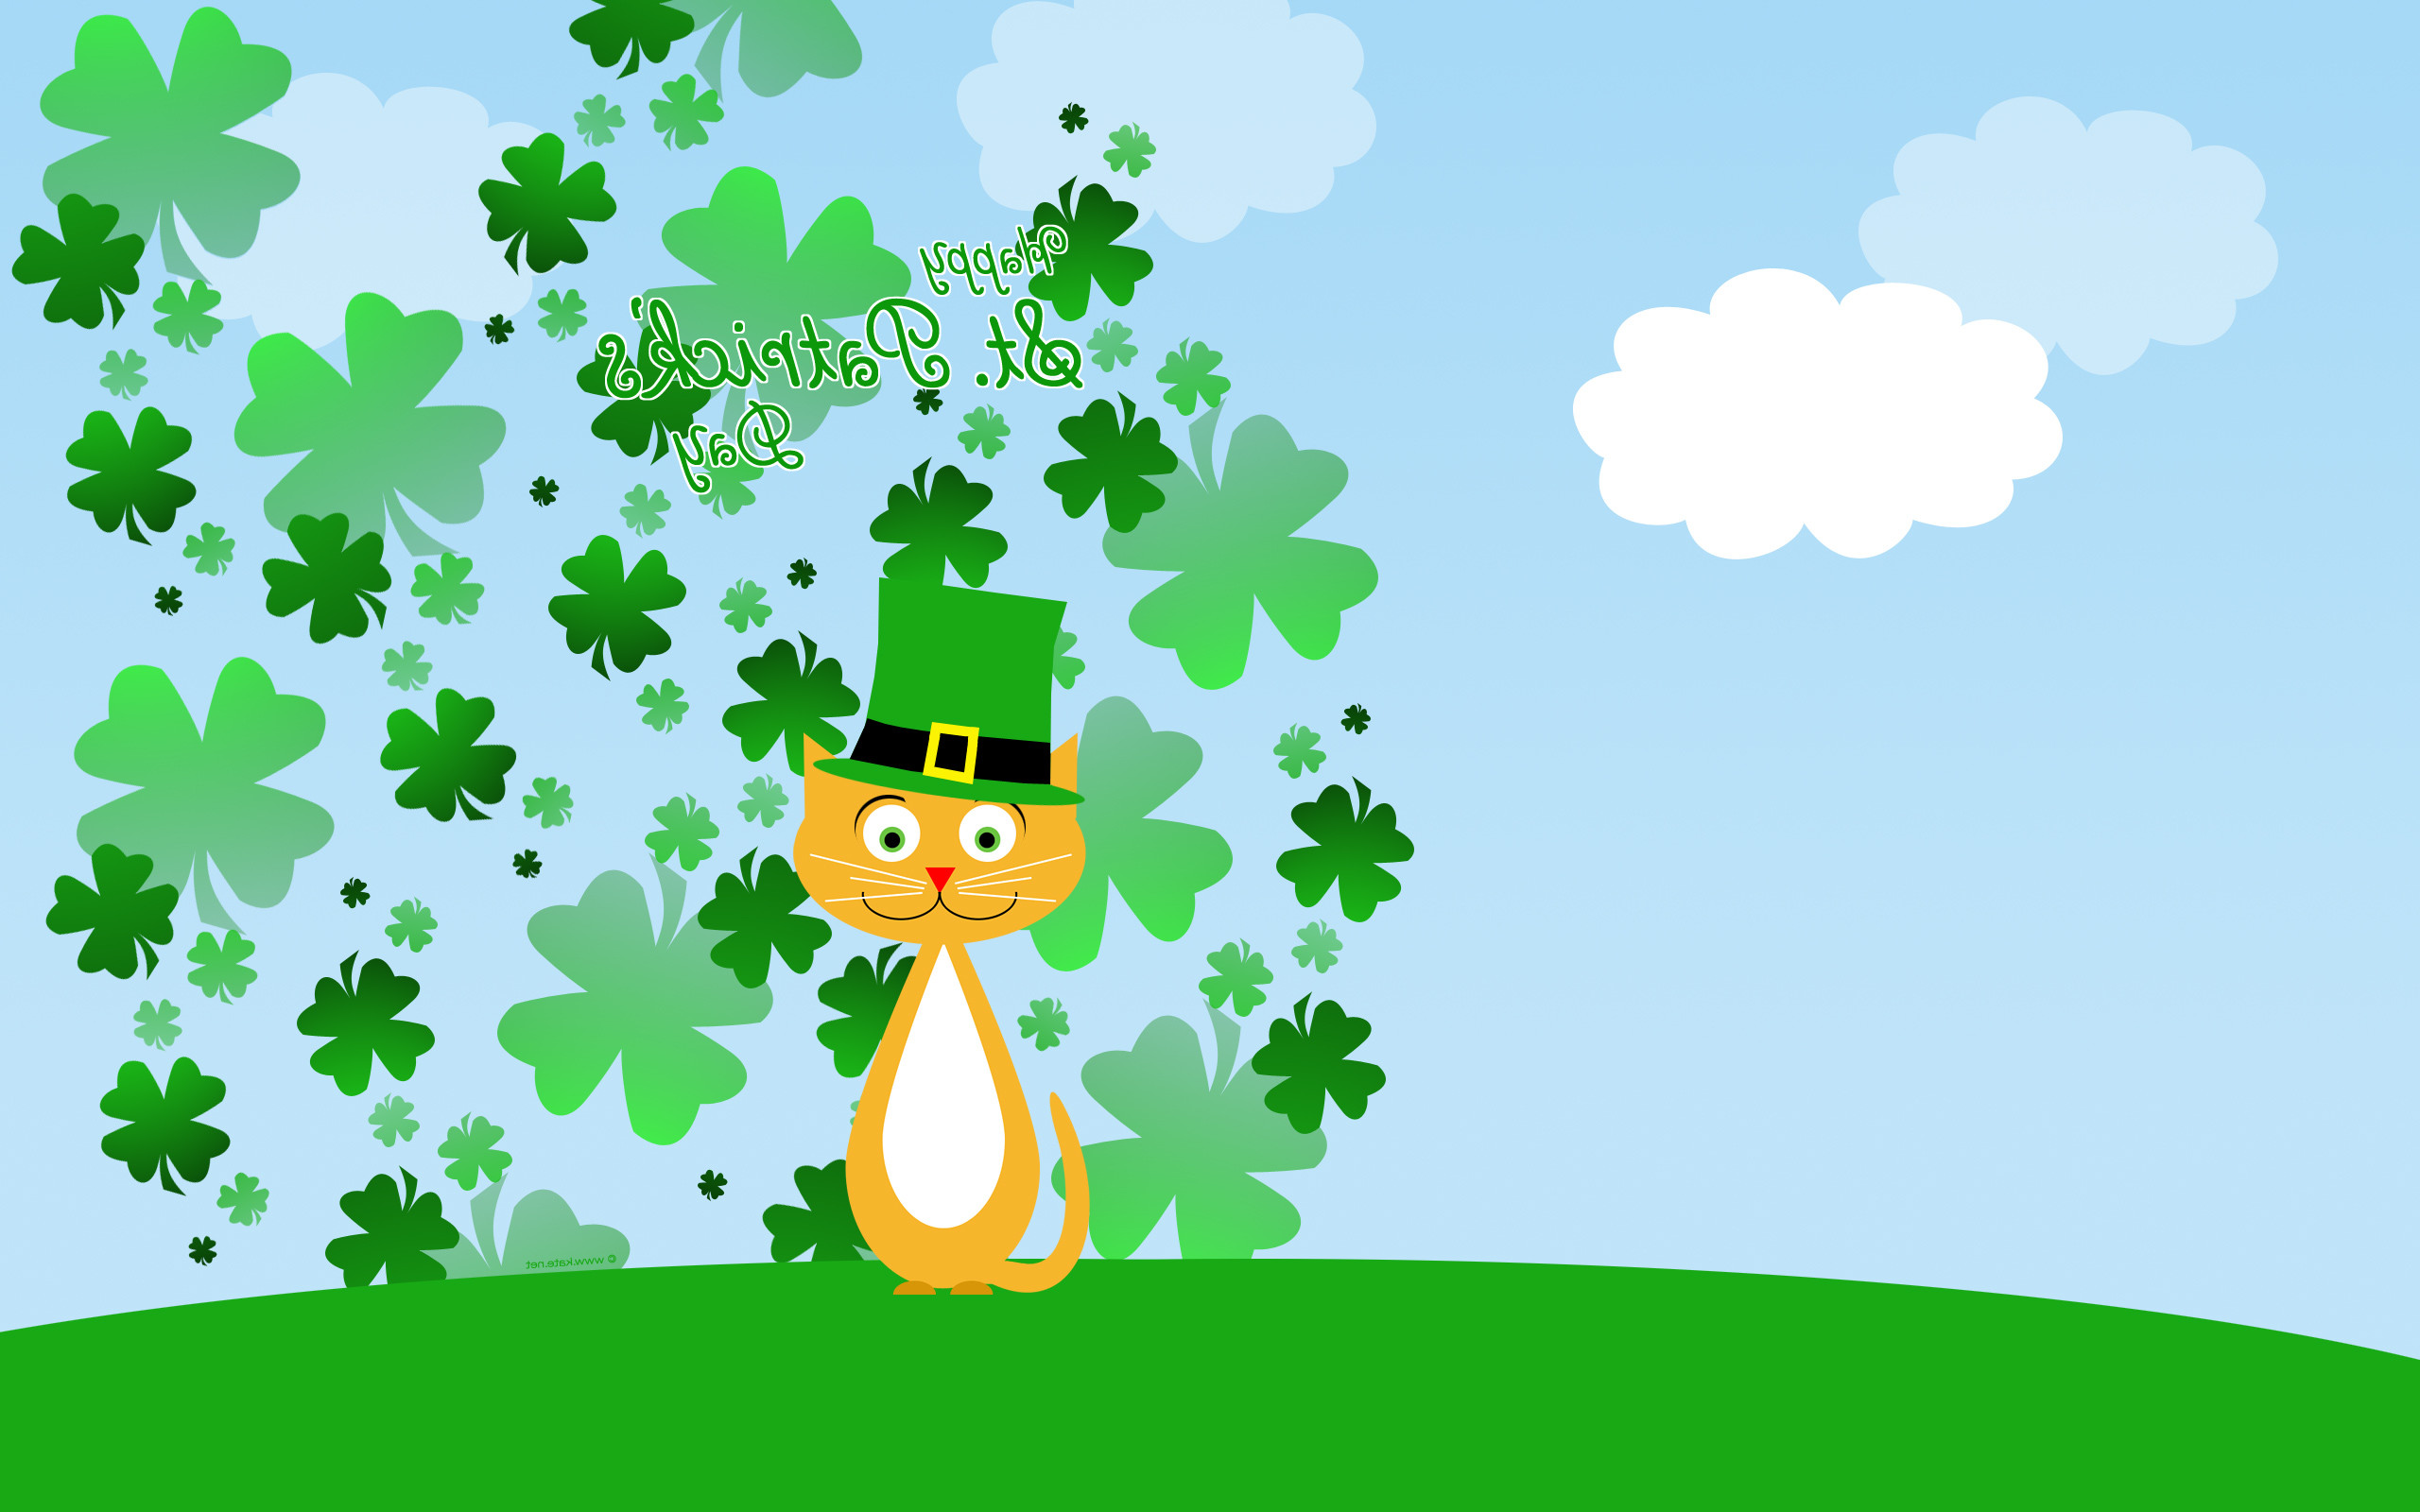 2560x1600 St Patricks Day Wallpapers Images Download Wallpapers download St Patricks  Day